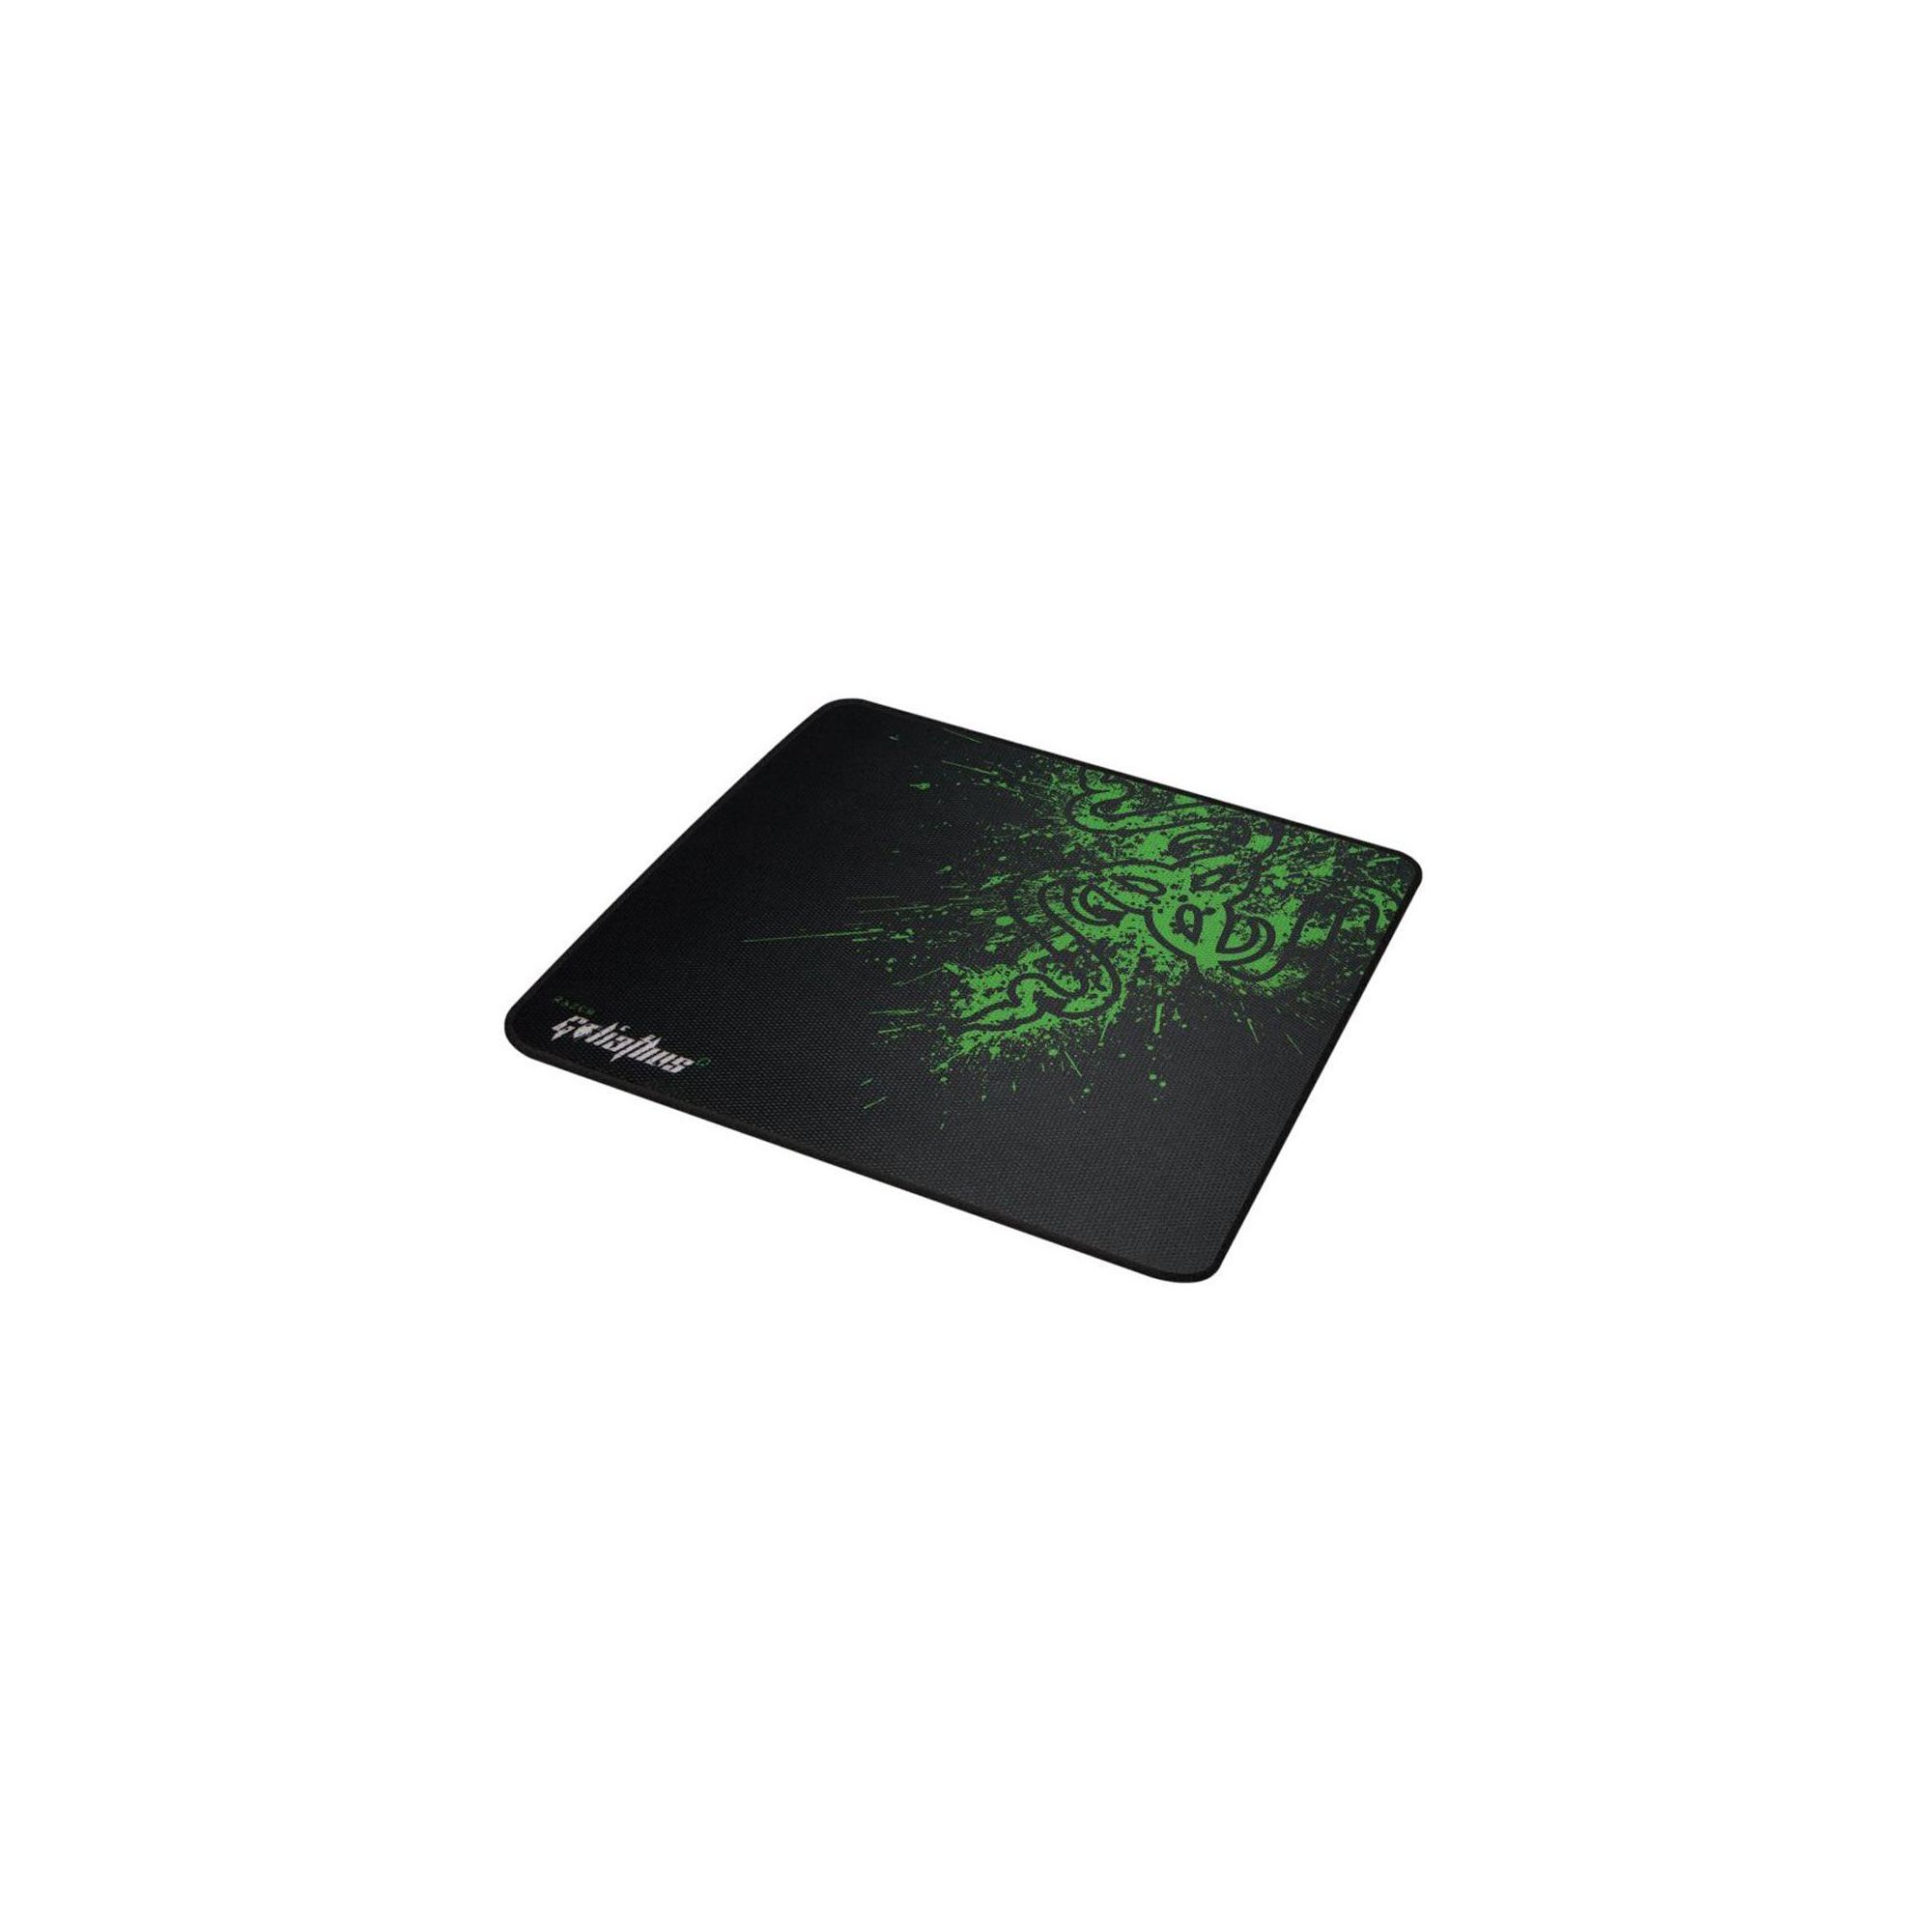 Razer Goliathus Standard Fragged Control Edition Mouse Mat at Tesco Direct